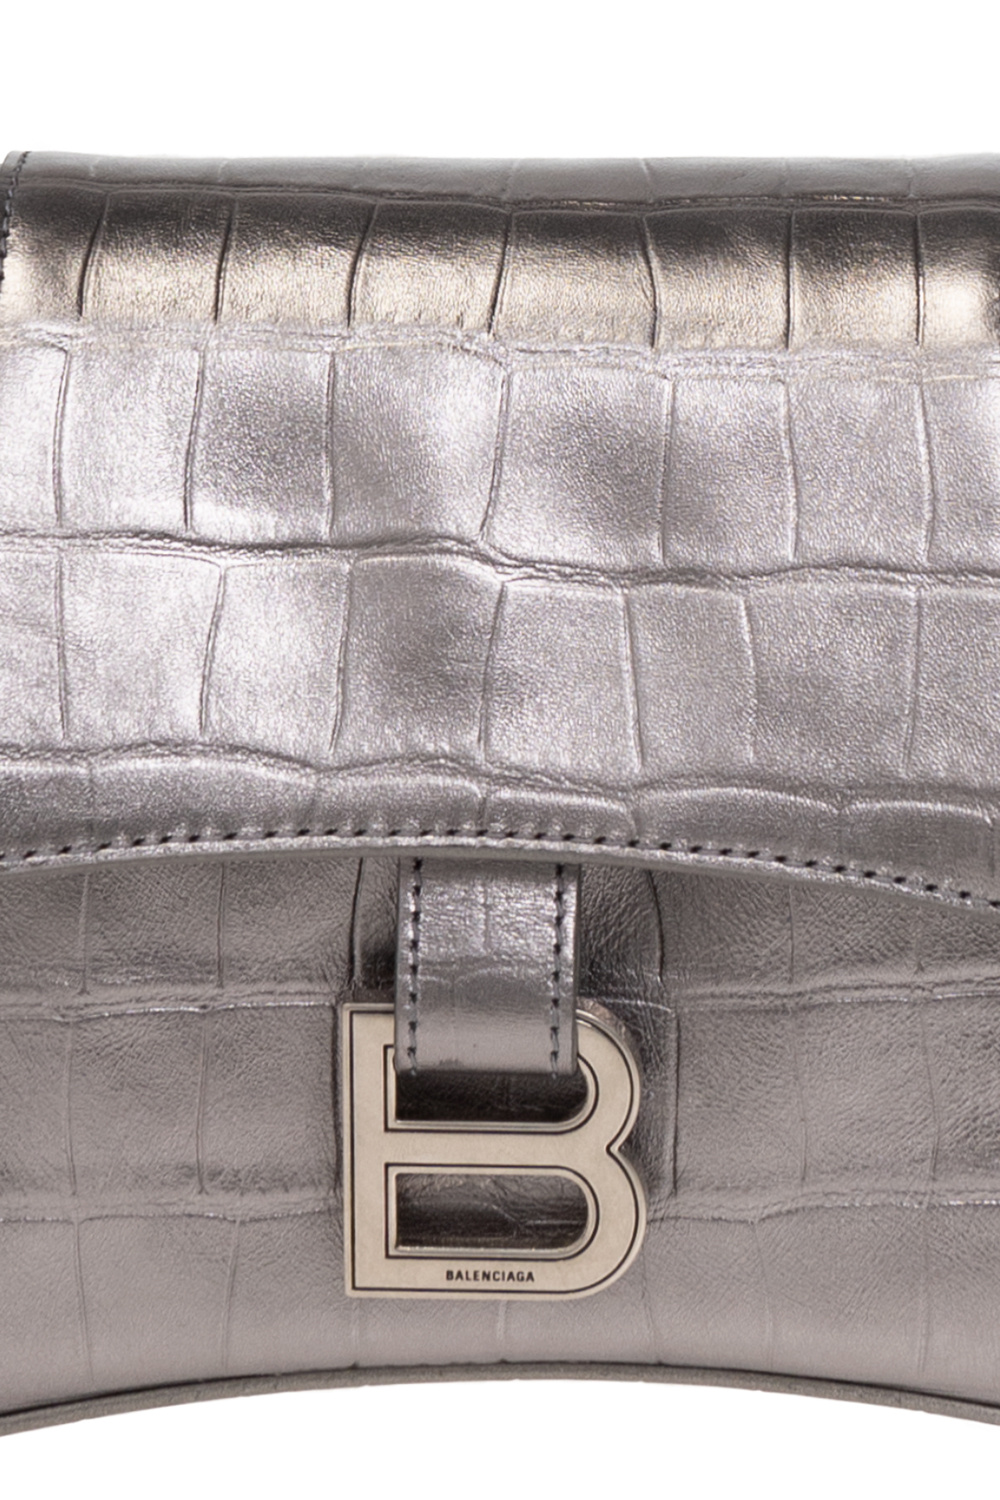 Emily small bag in silver crocodile-effect leather